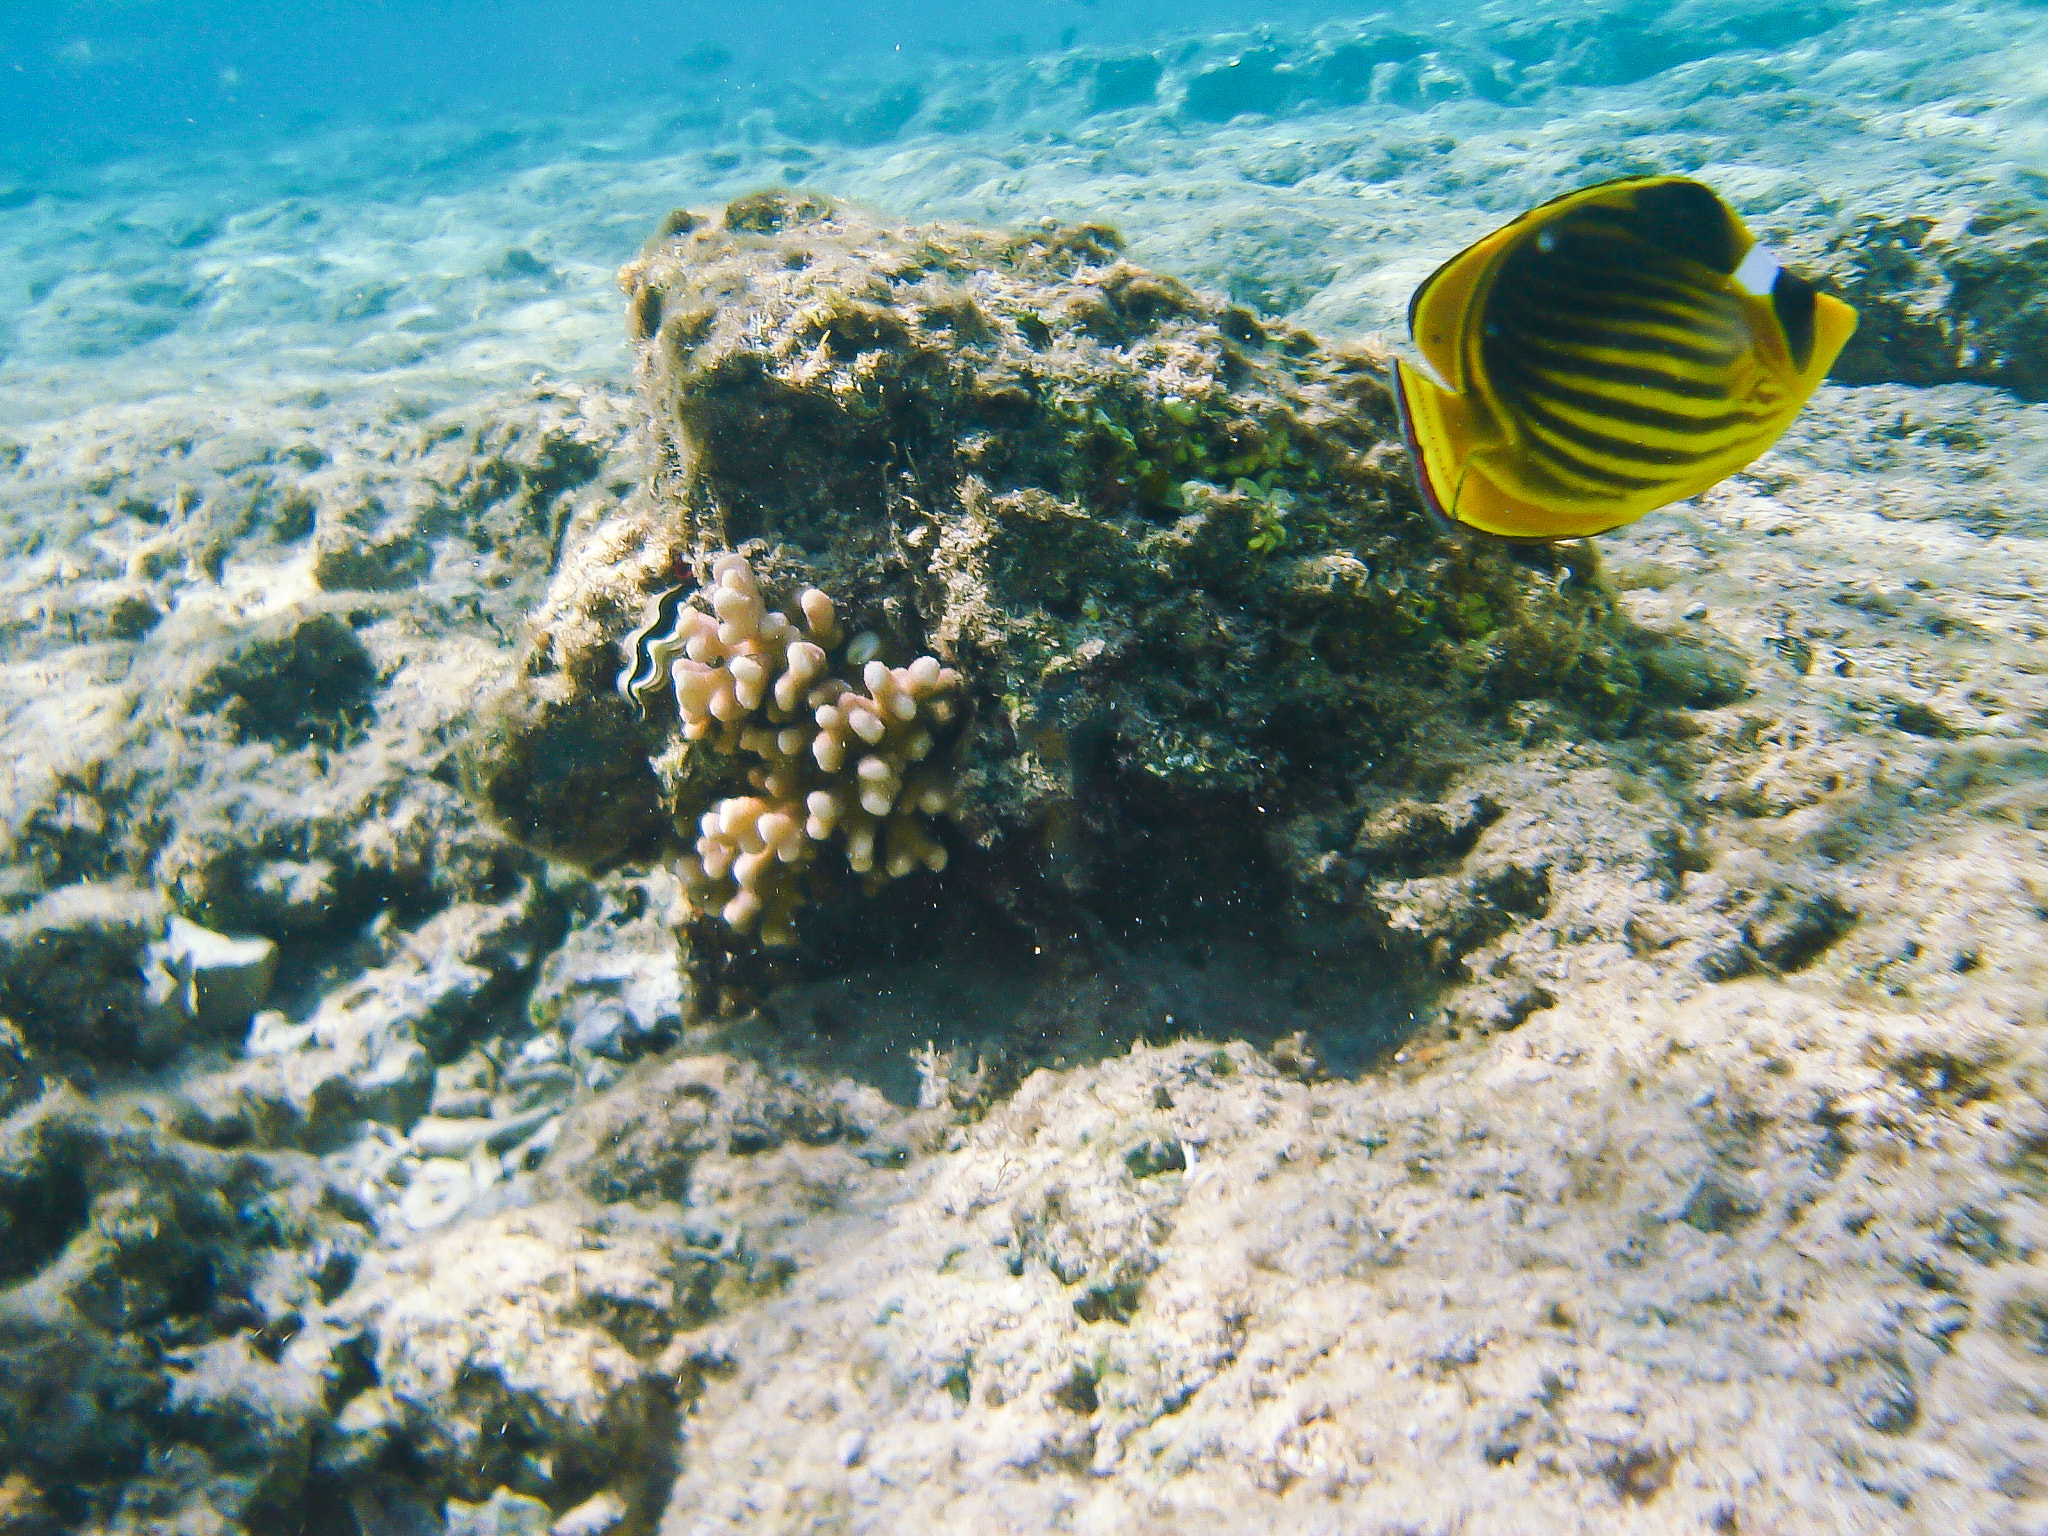 Sony DSC-S40 sample photo. Butterfly and one coral reef photography